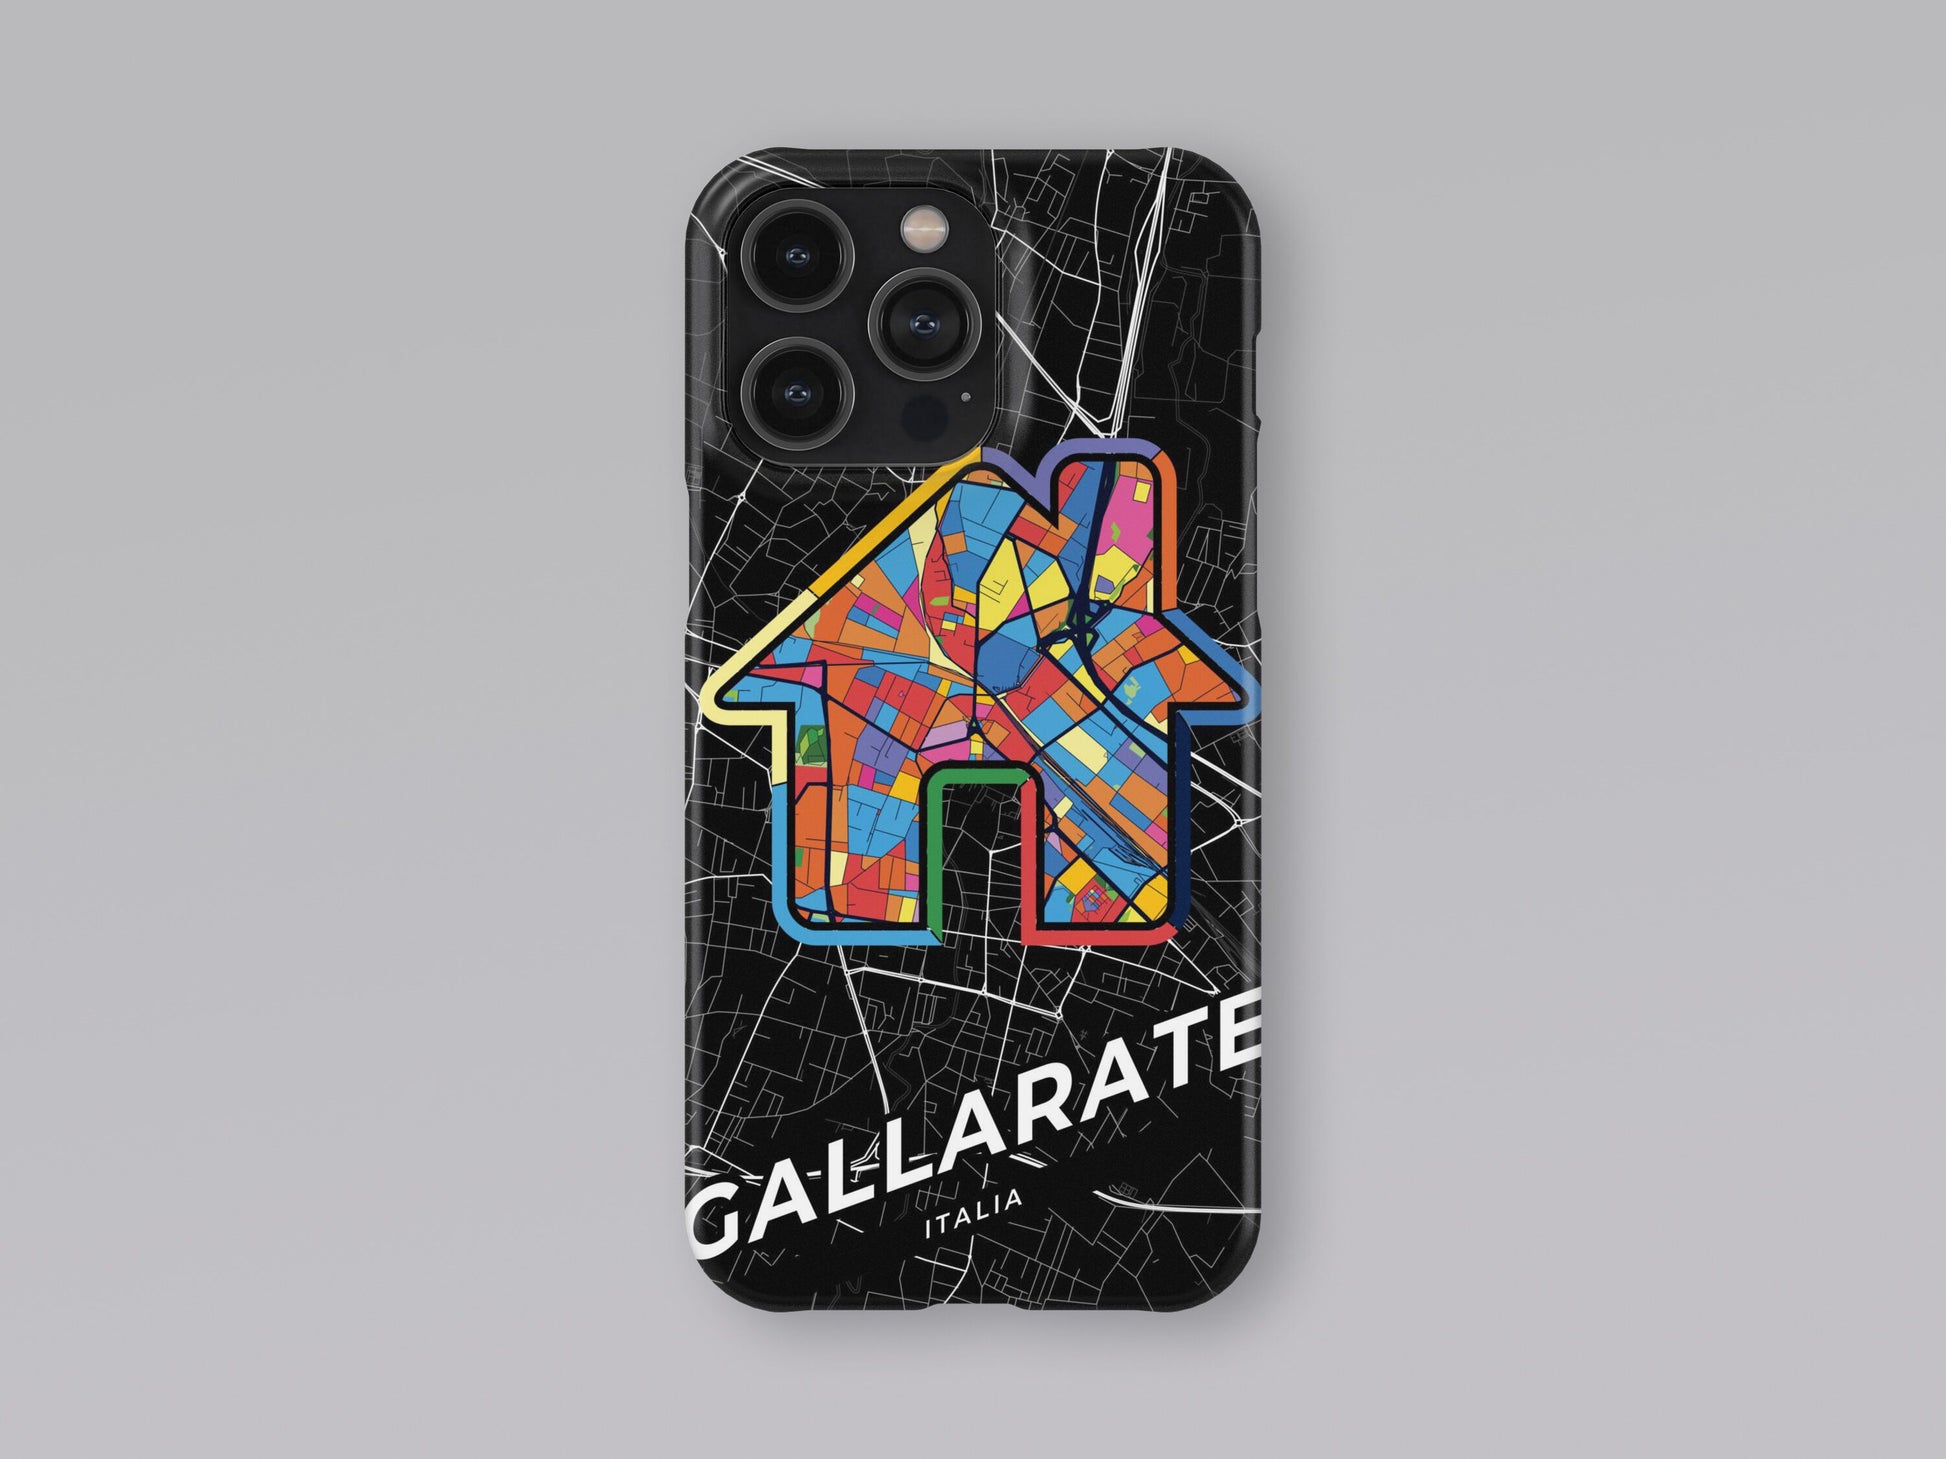 Gallarate Italy slim phone case with colorful icon. Birthday, wedding or housewarming gift. Couple match cases. 3